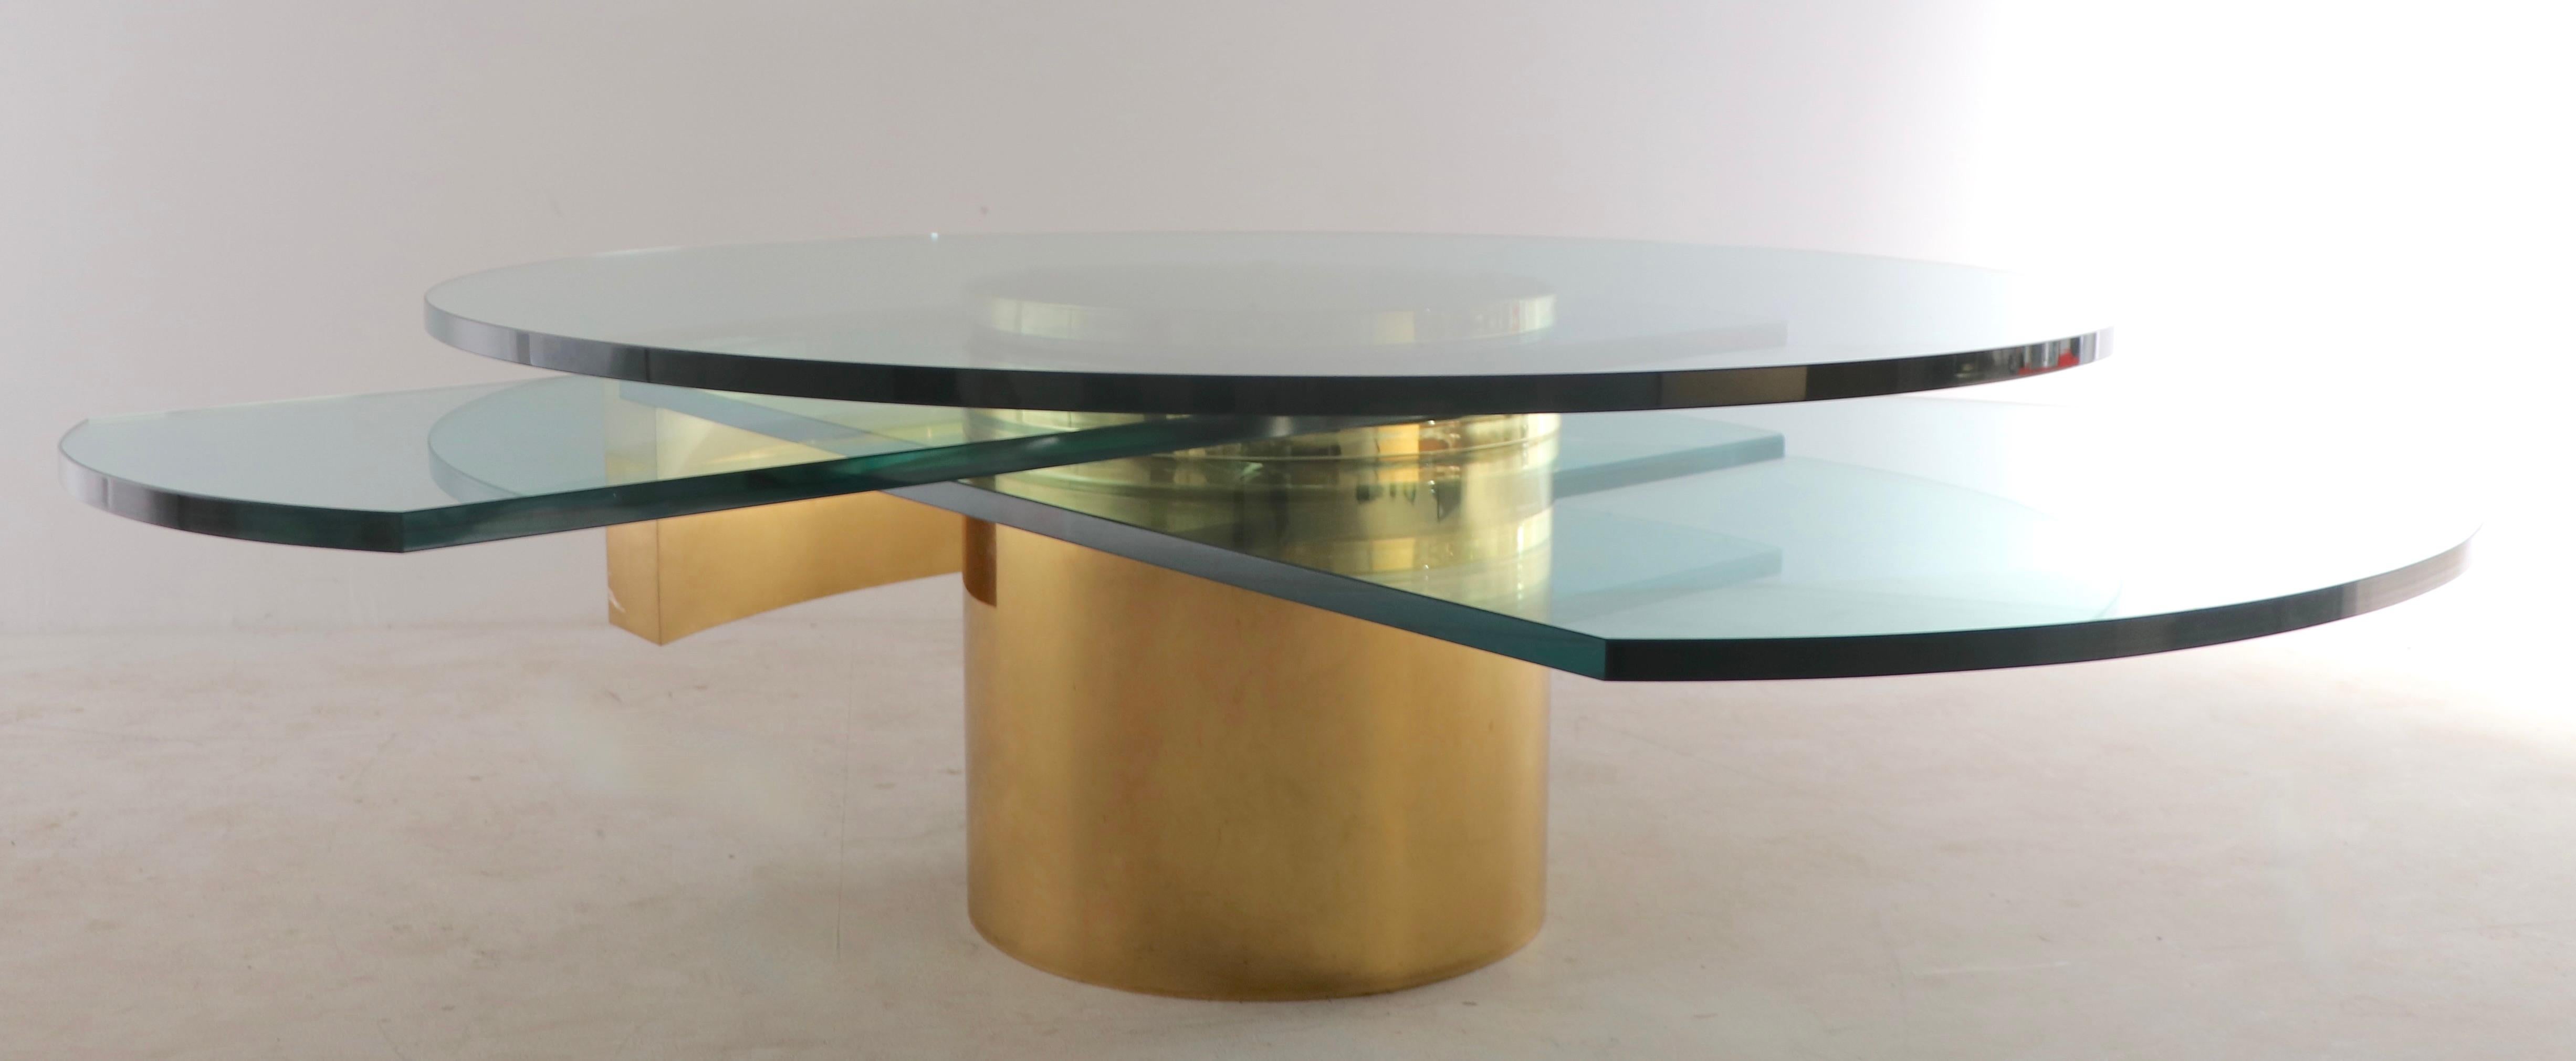 Self Winding Coffee Table by Dakota Jackson Post Modern Coffee Table 1978 In Good Condition For Sale In New York, NY